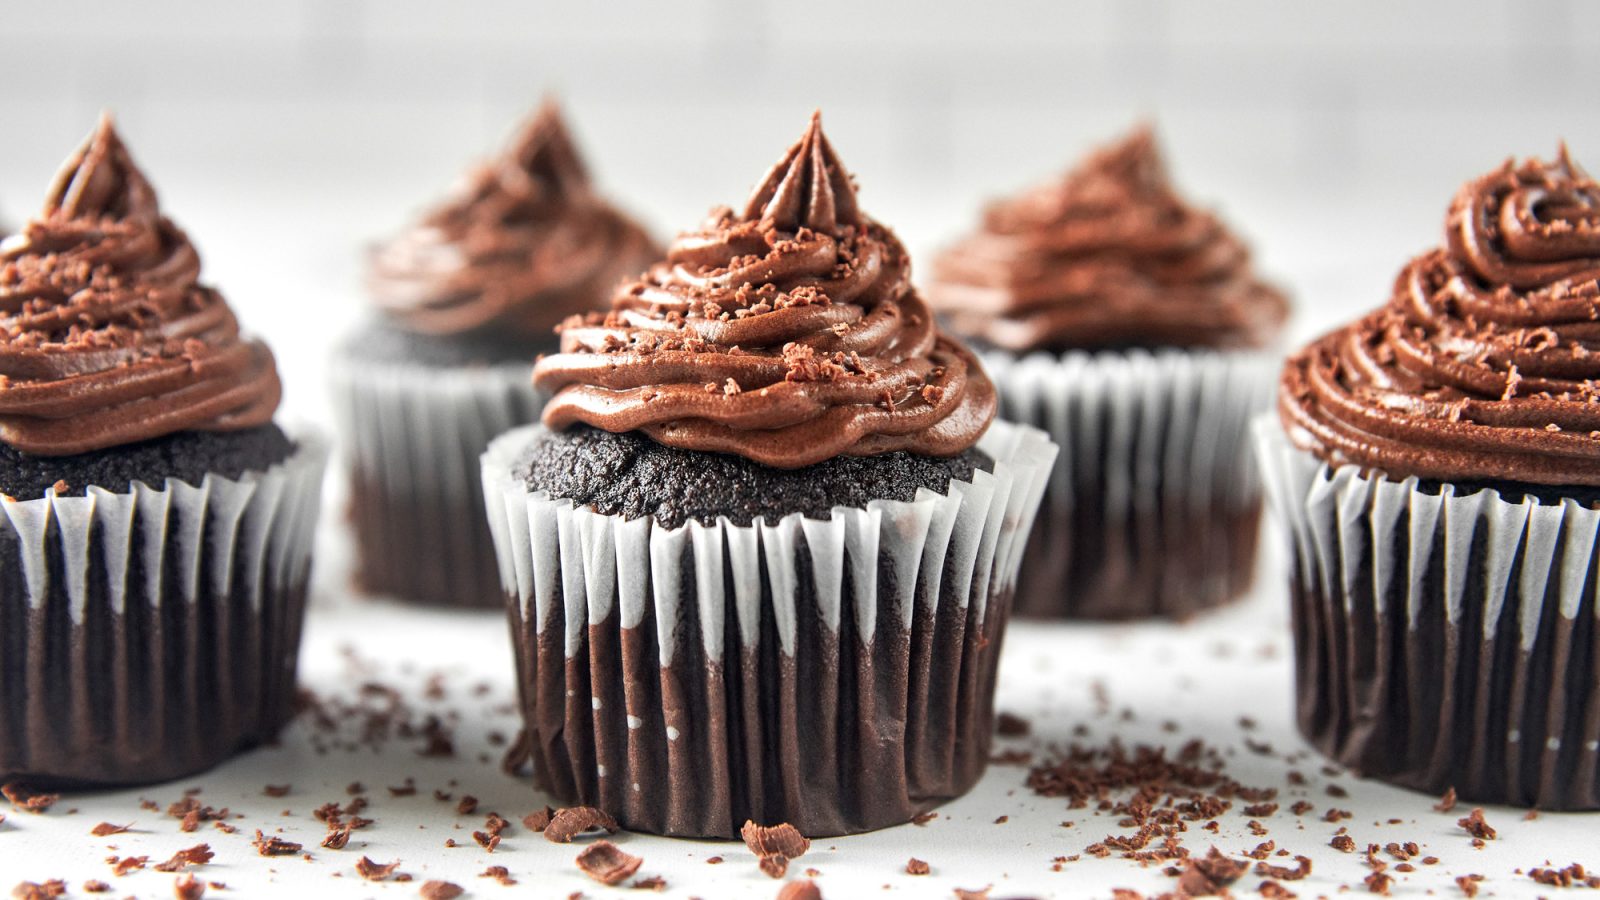 vegan chocolate cupcakes with chocolate frosting